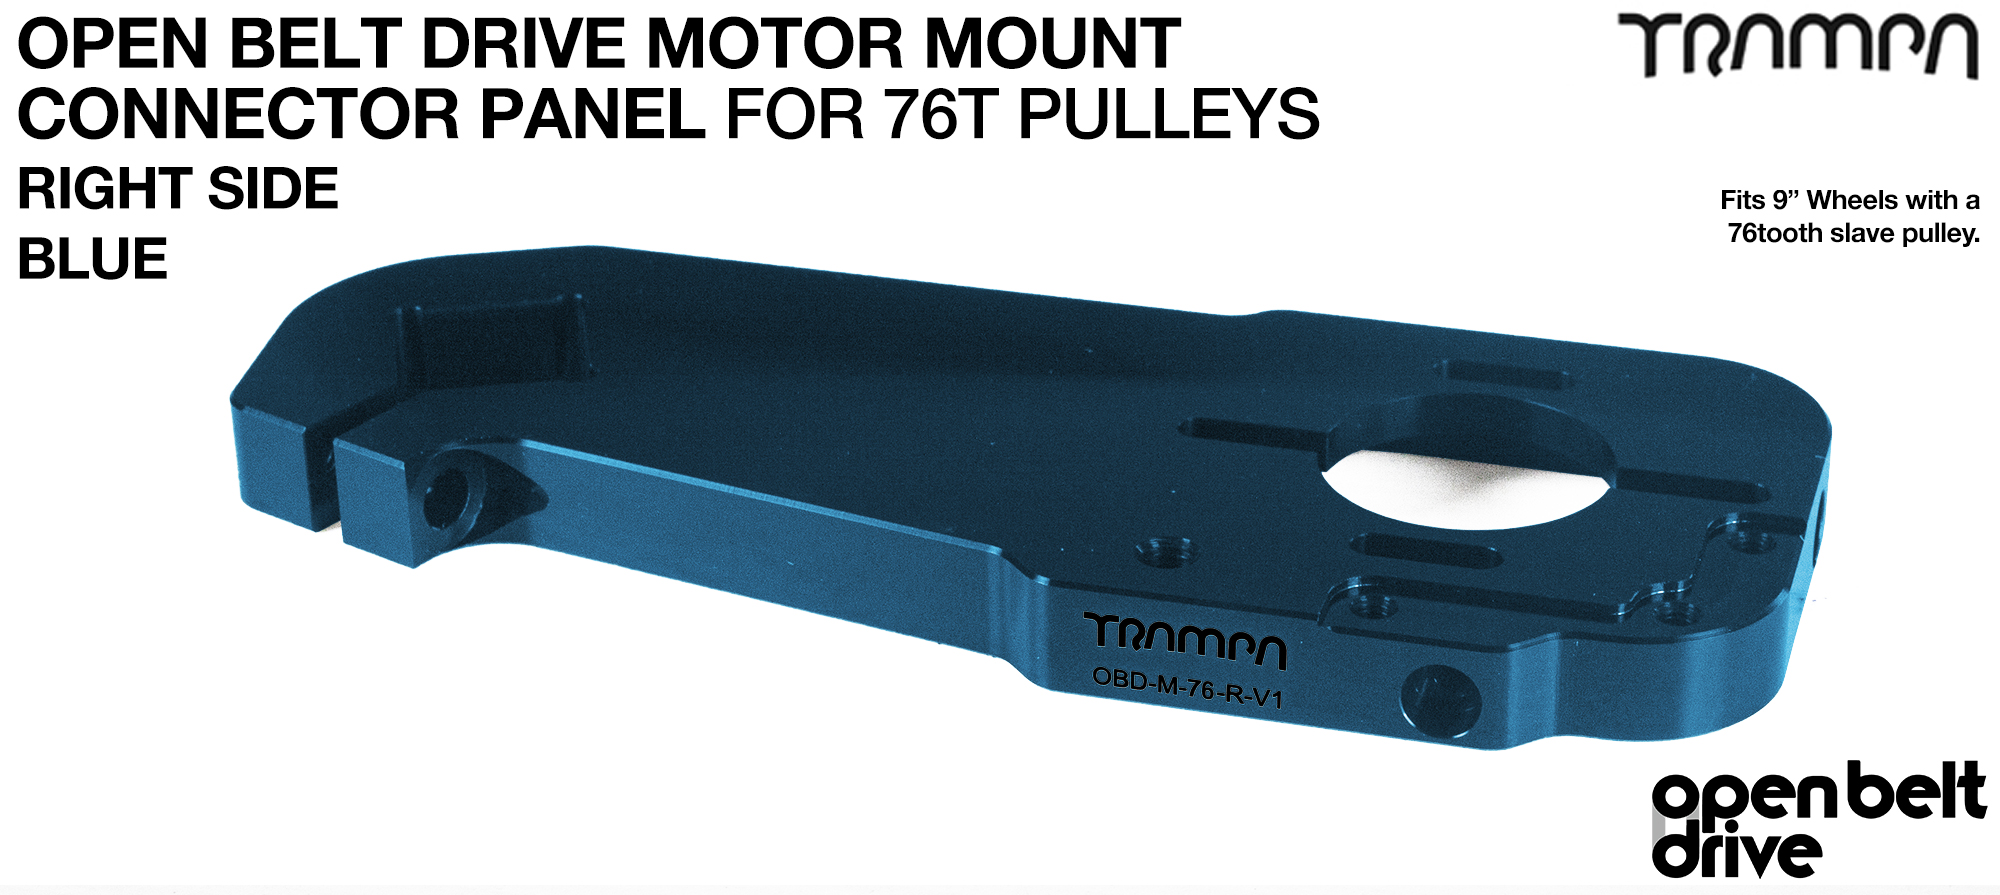 OBD Motor Mount Connector Panel for 76 tooth Pulleys - GOOFY - BLUE